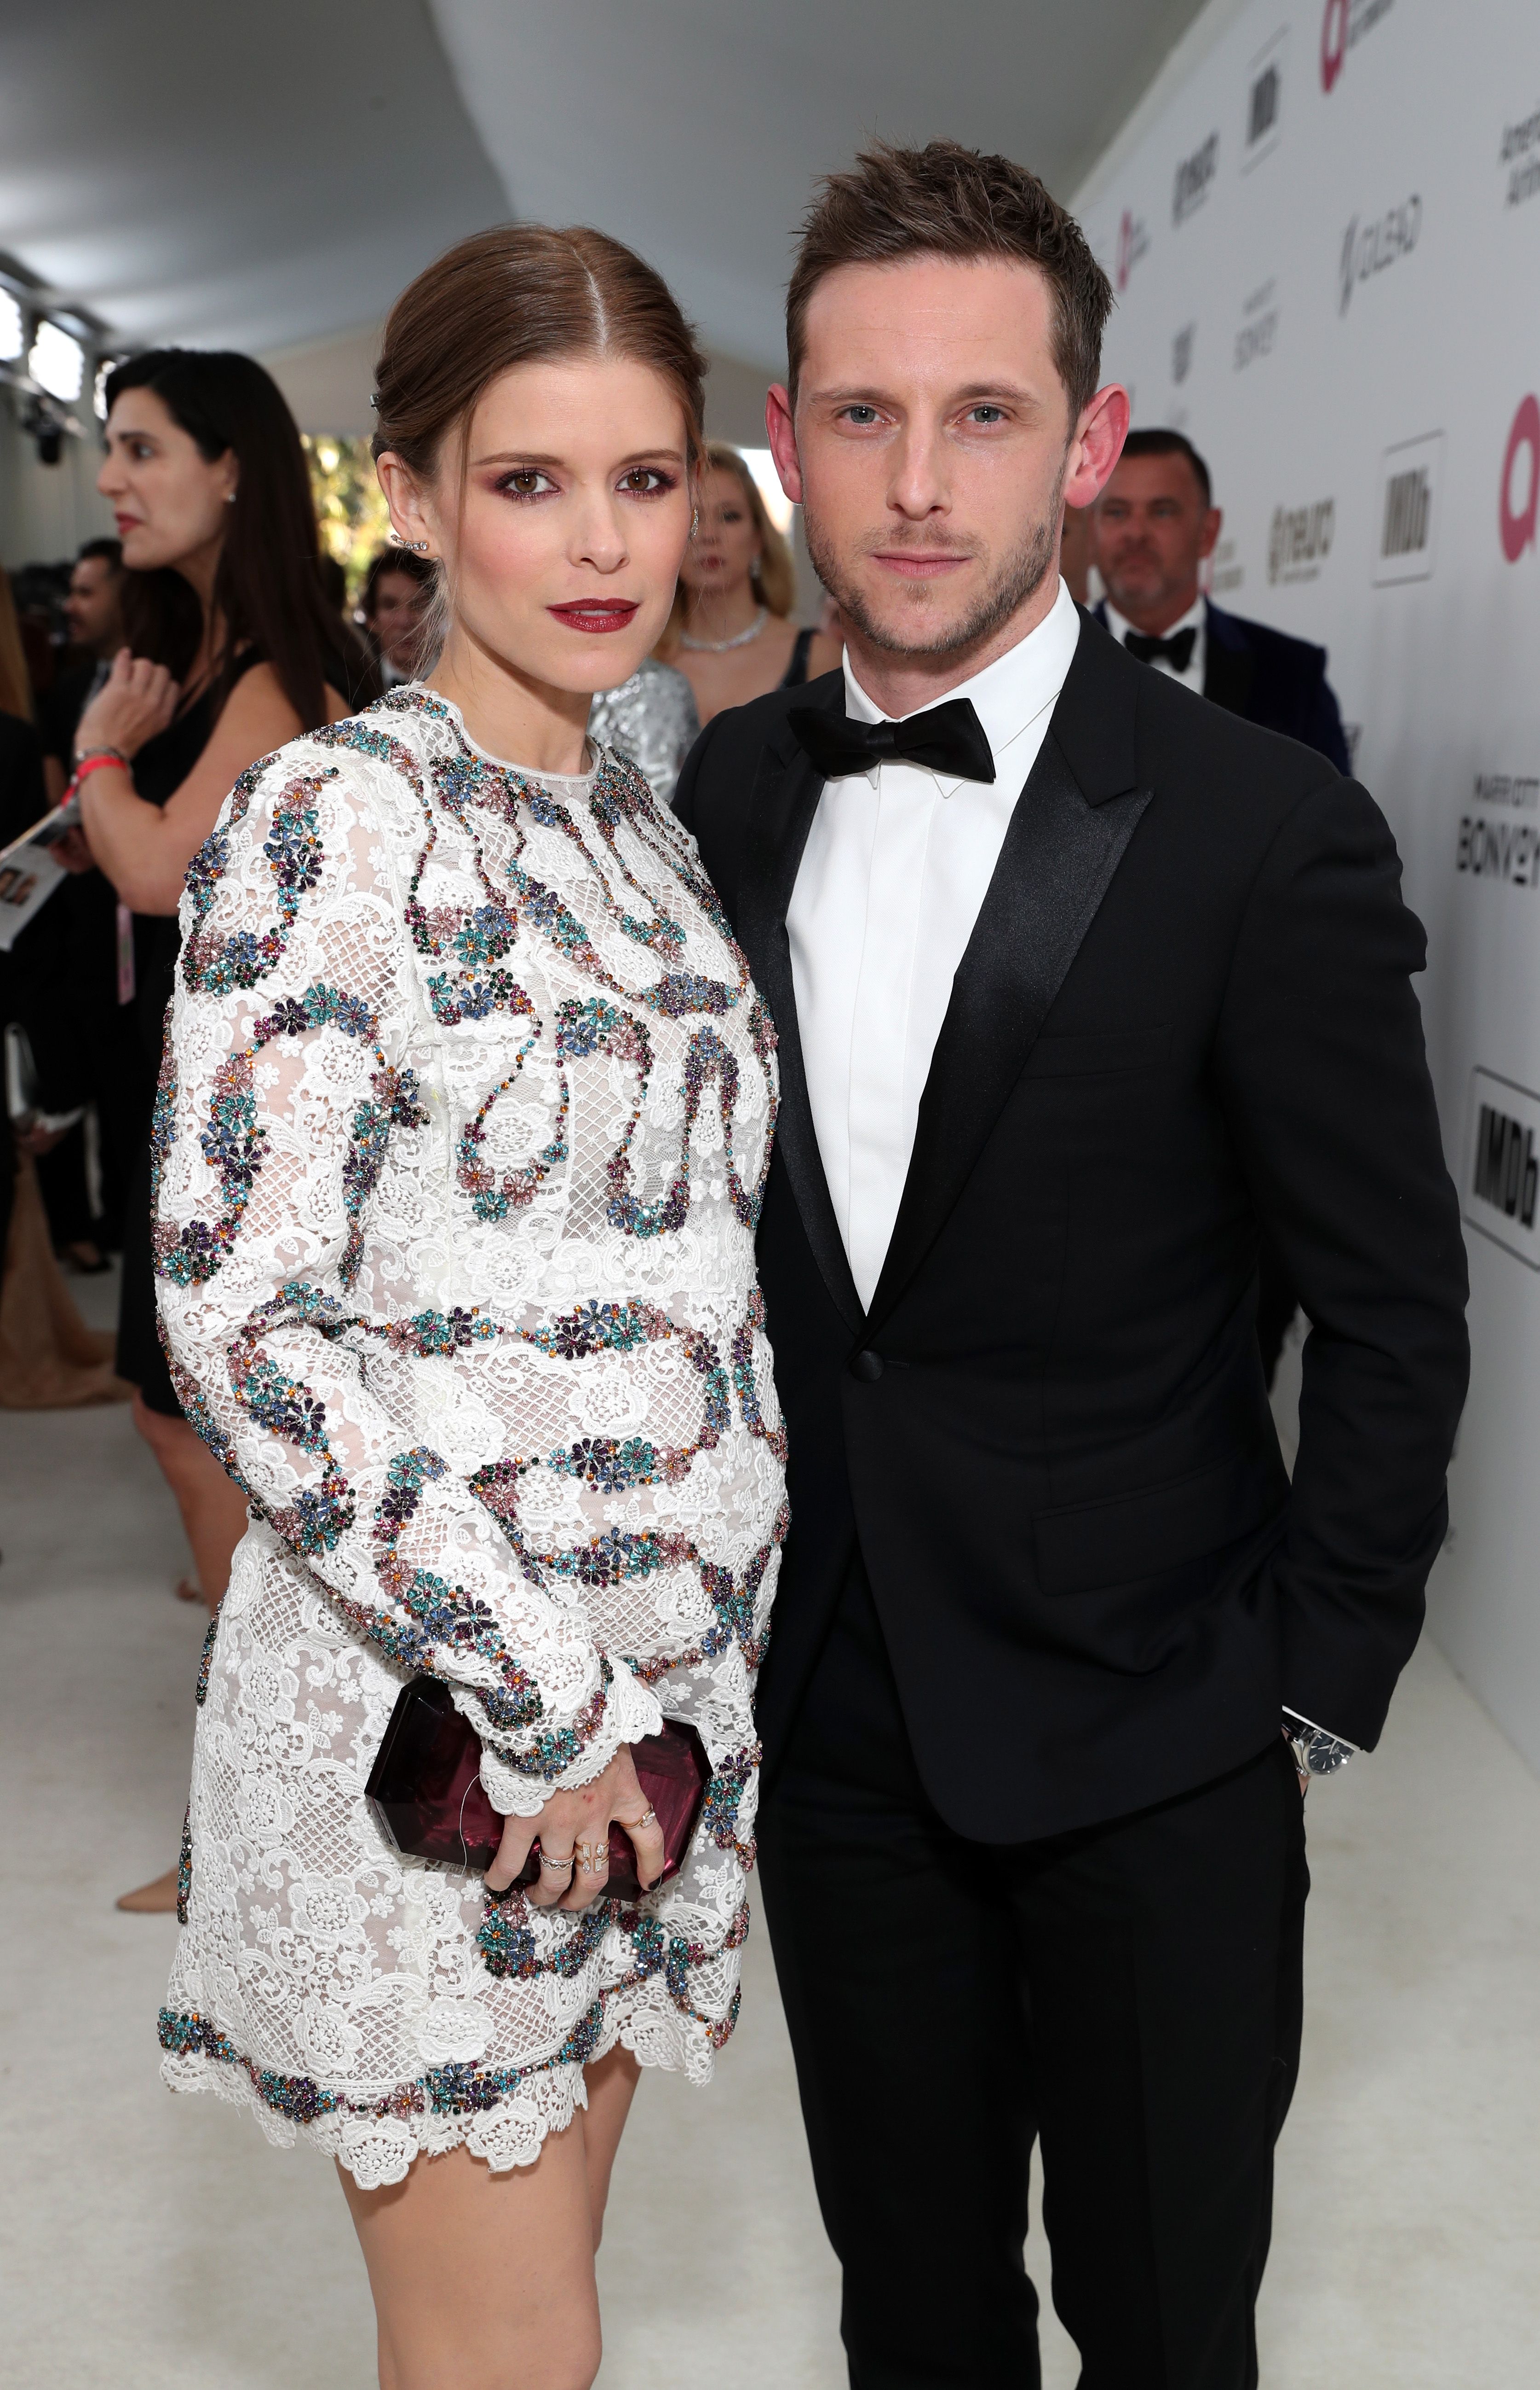  Kate Mara and Jamie Bell at the 27th annual Elton John AIDS Foundation Academy Awards Viewing Party sin February 2019 in West Hollywood, California | Source: Getty Images